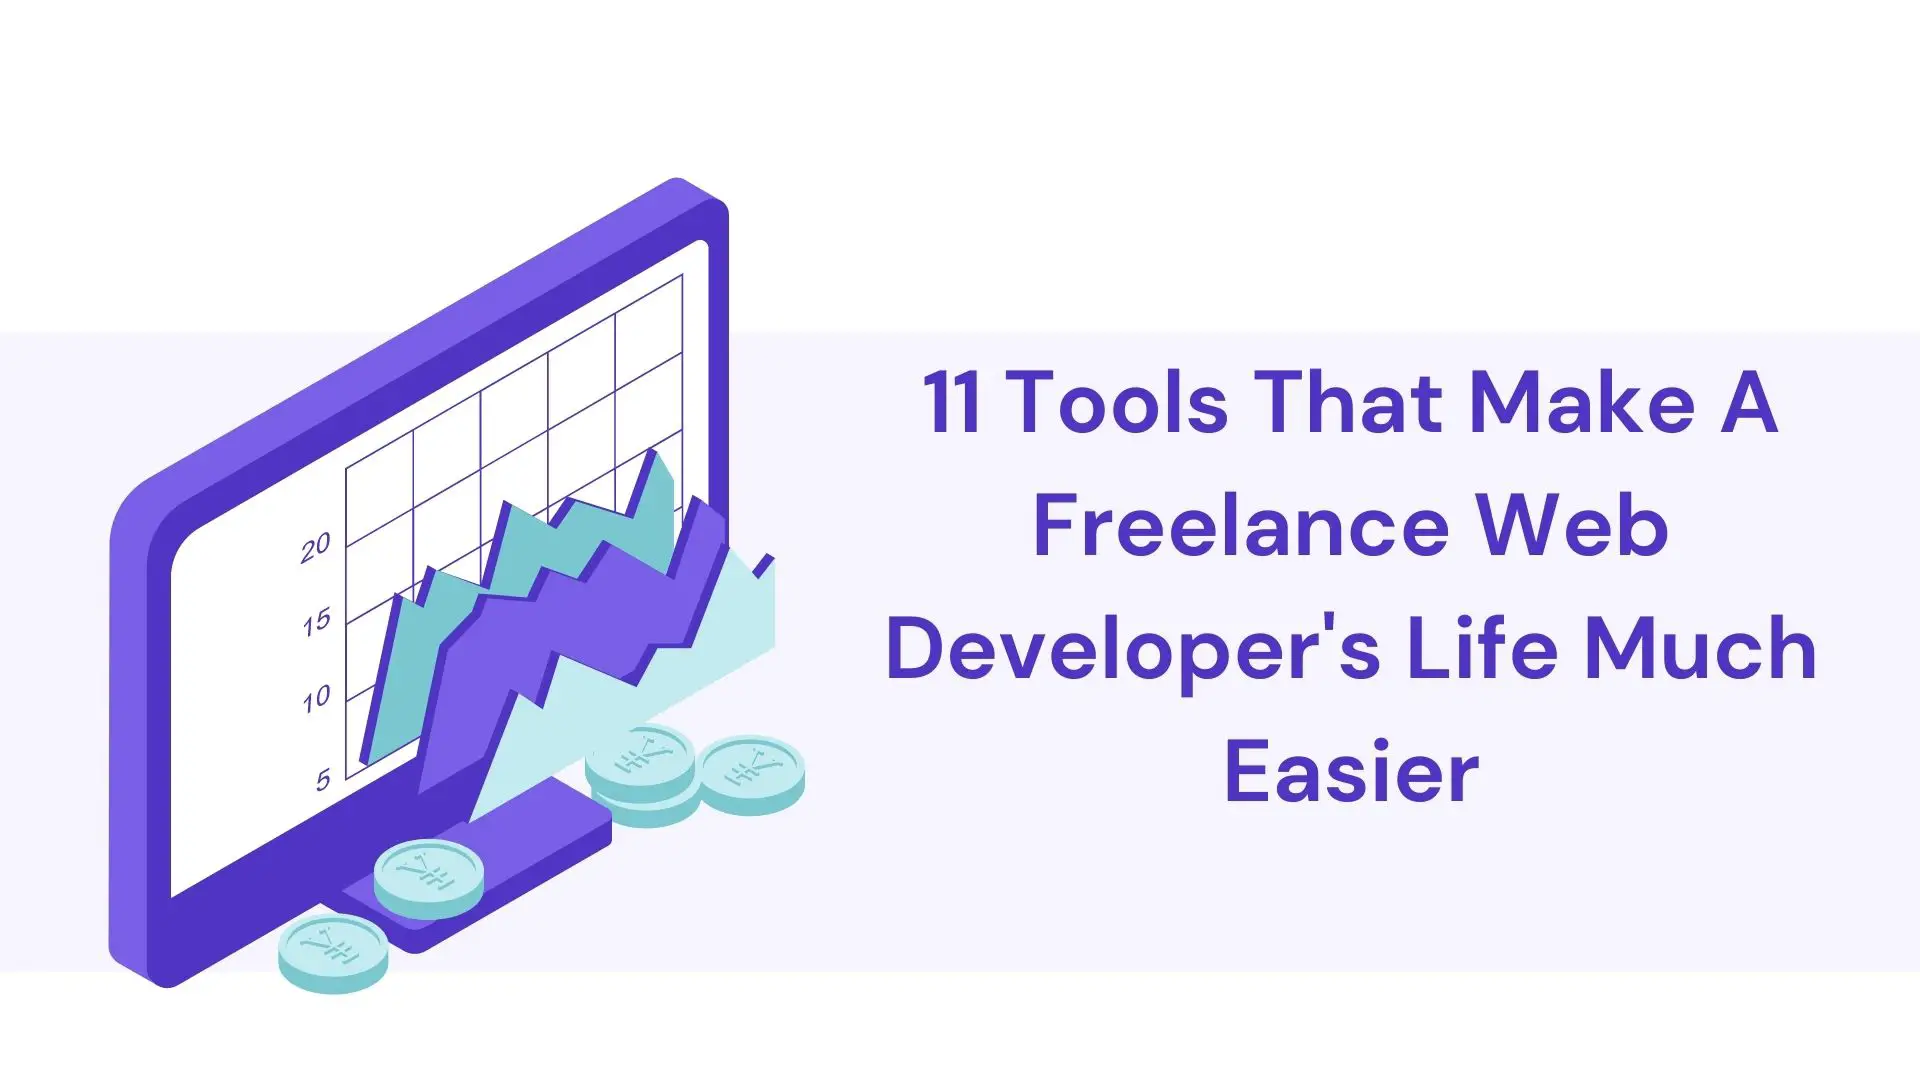 11 Tools That Make A Freelance Web Developer's Life Much Easier